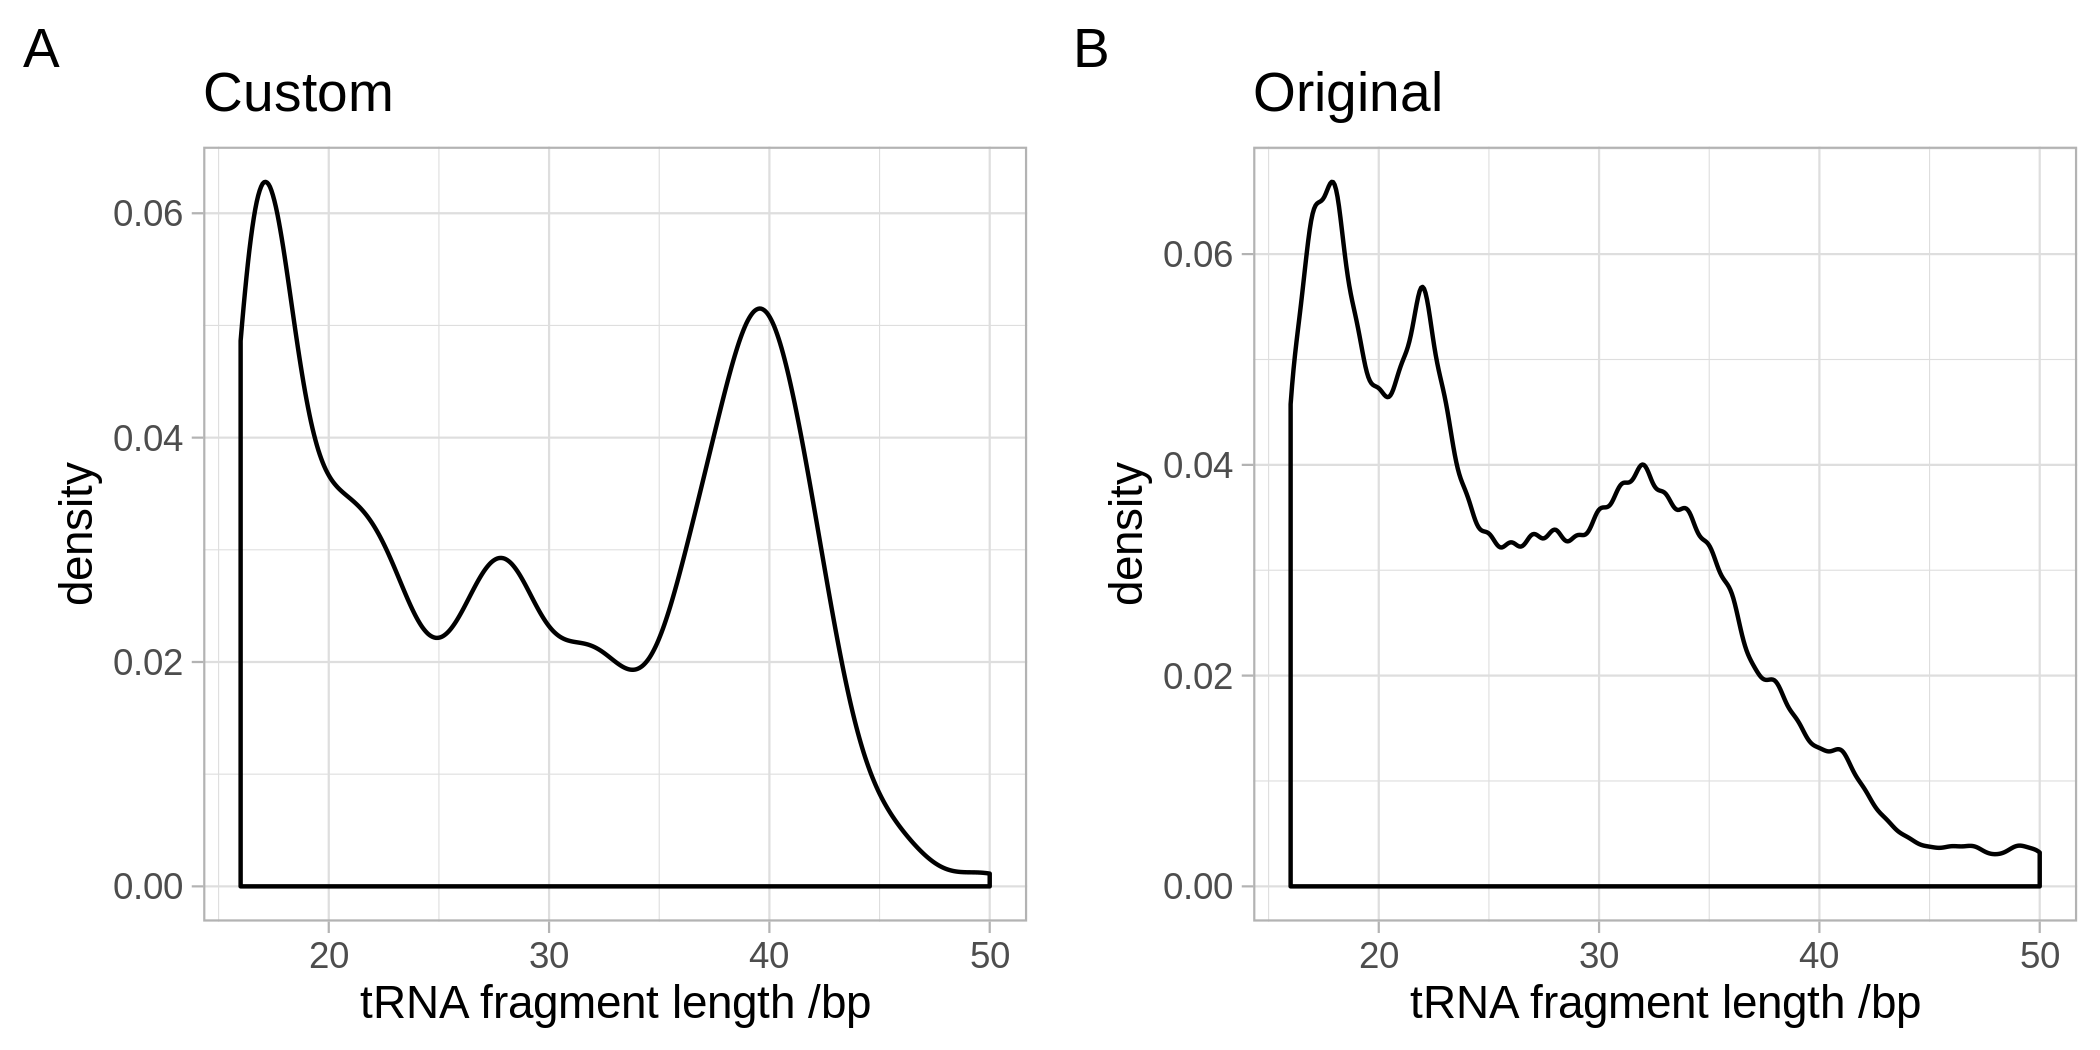 Comparison of the fragment size distributions between our custom reference A) and the original the MINTmap reference B).